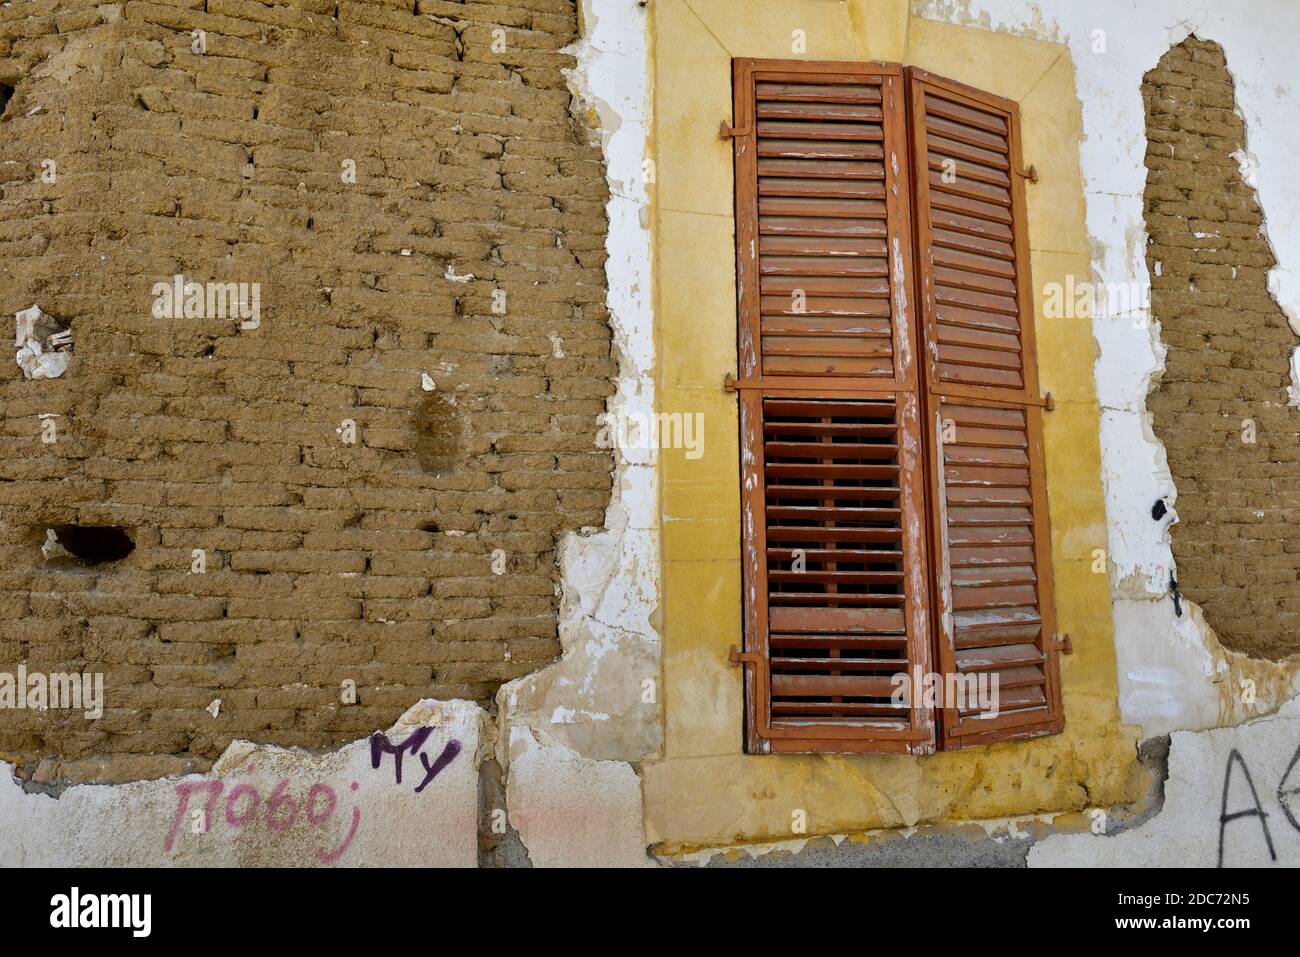 Old handmade clay and straw mud bricks exposed in house wall with shuttered dressed stone surround of window Stock Photo